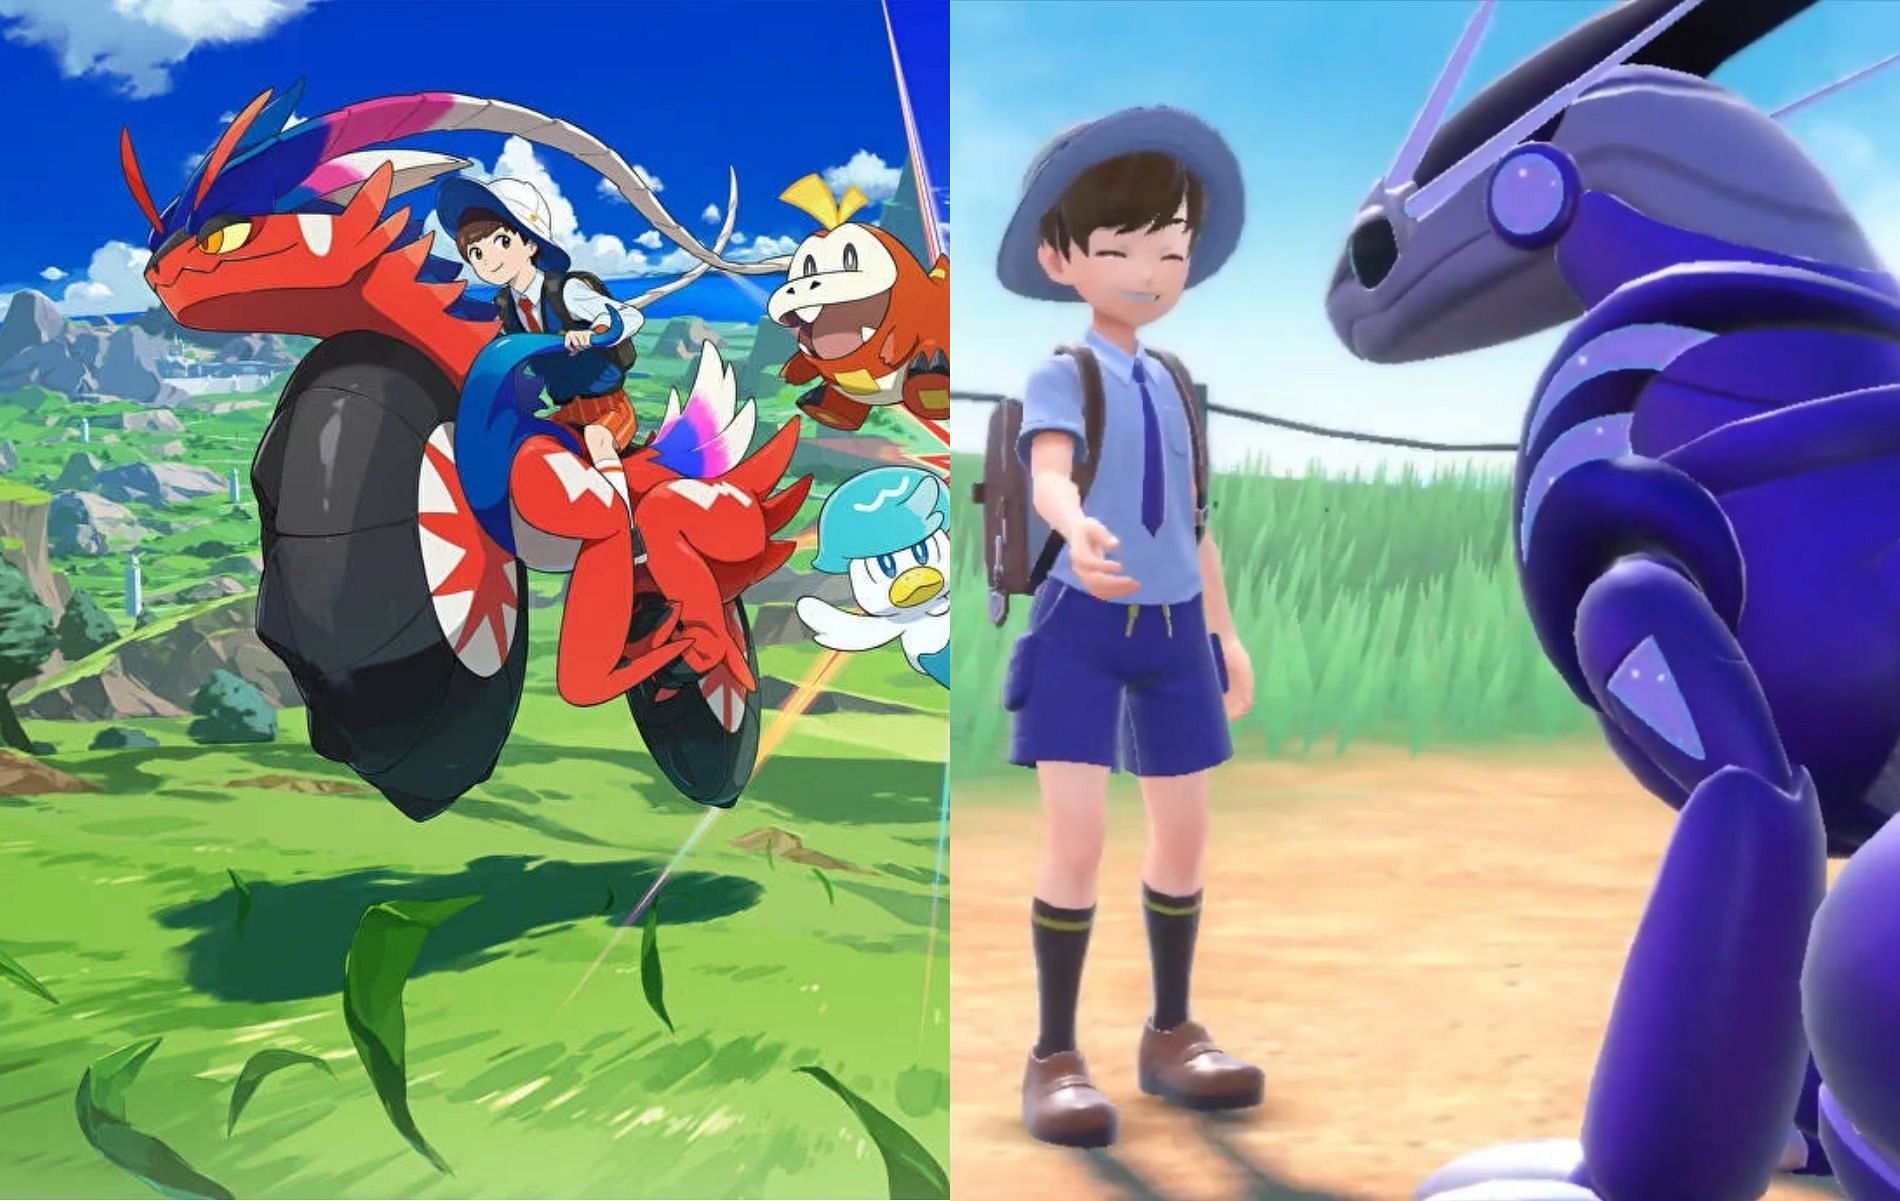 Both versions have their perks with some great picks (Images via The Pokemon Company)